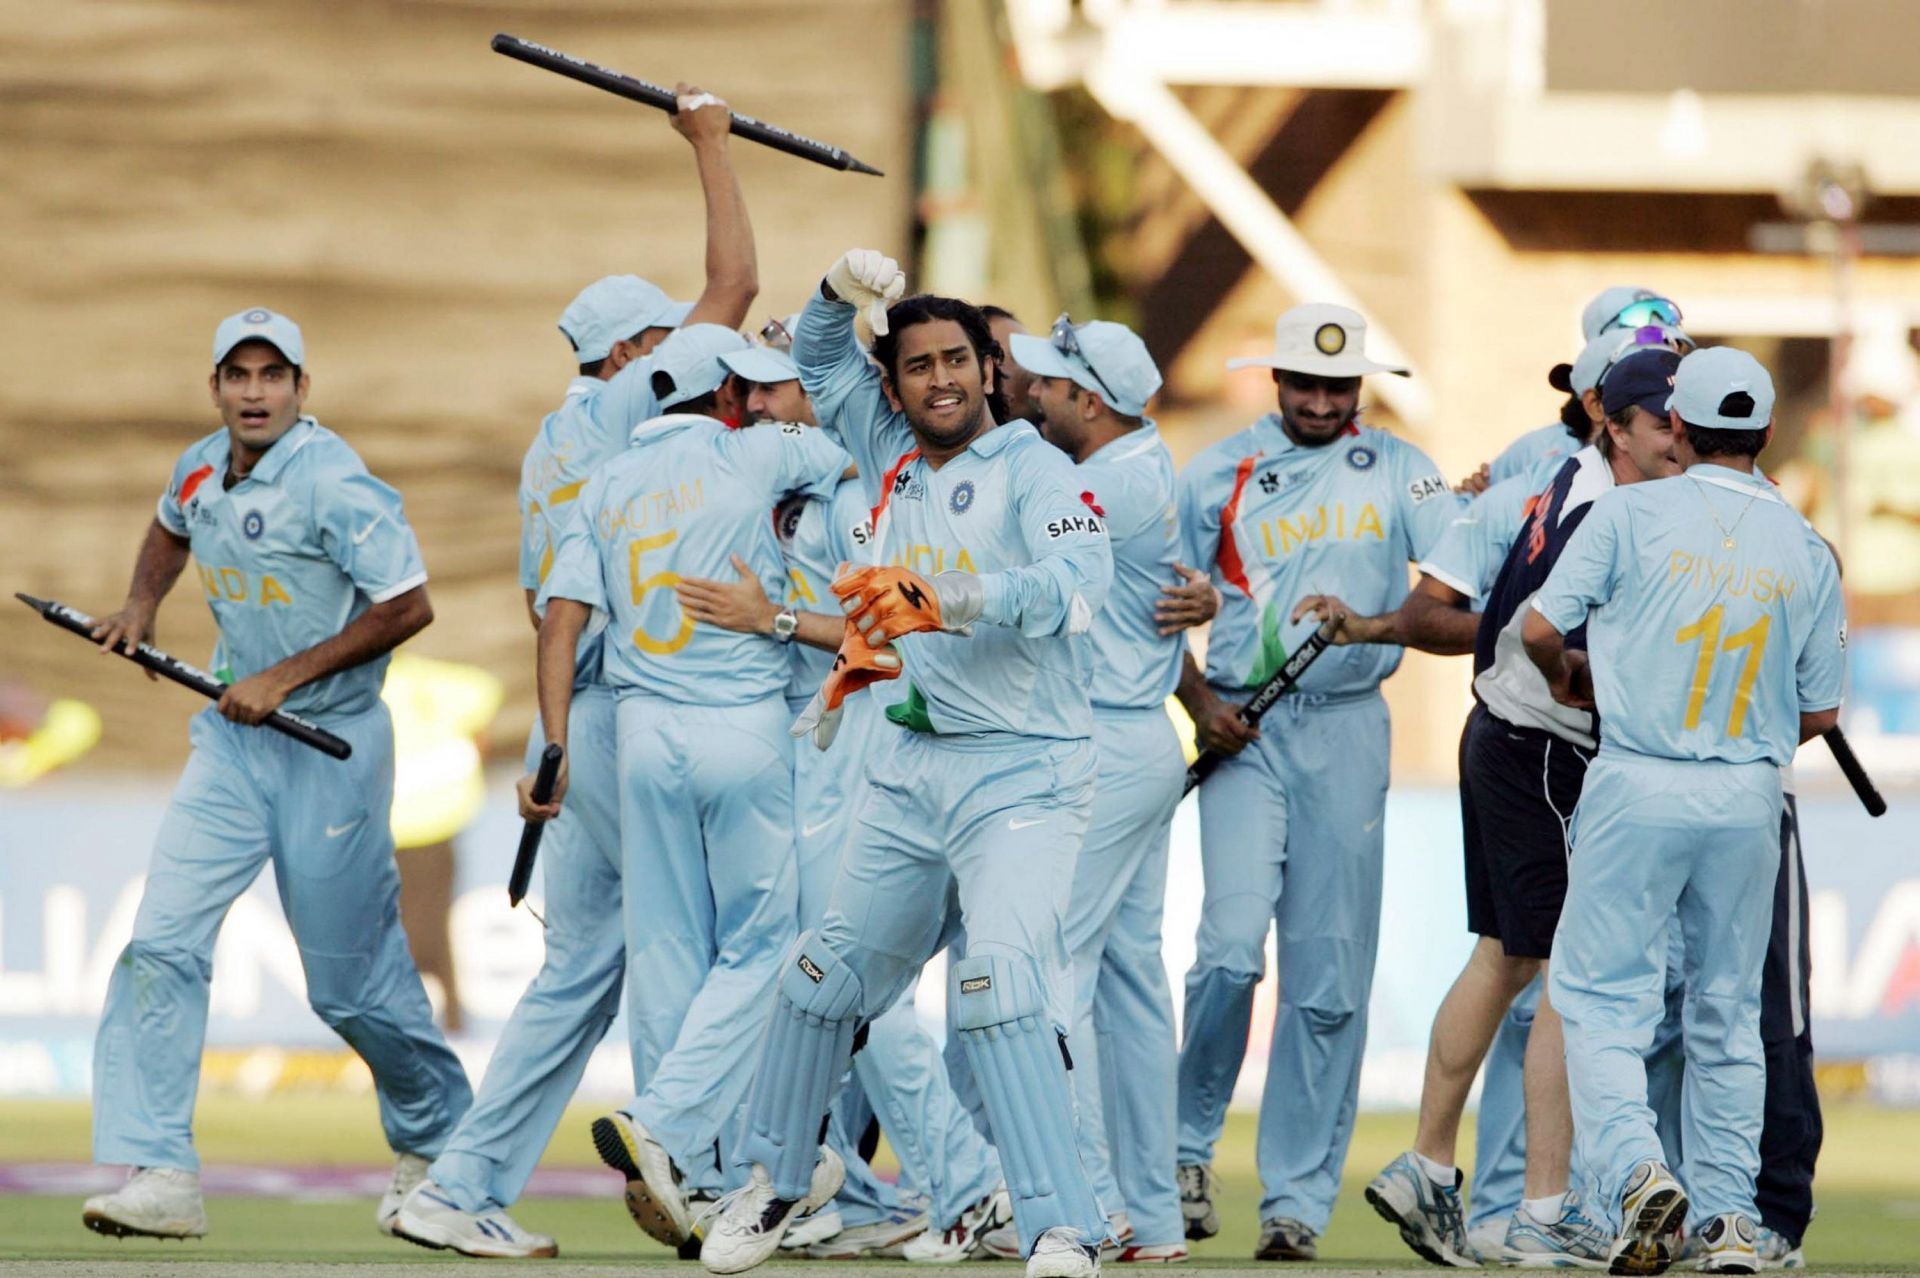 MS Dhoni of India and his team mates celebrates their victory during the final match of the ICC Twenty20 World Cup between Pakistan and India held at the Wanderers Cricket Stadium on September 24, 2007 in Johannesburg, South Africa. (Photo by Duif du Toit/Gallo Images/Getty Images)